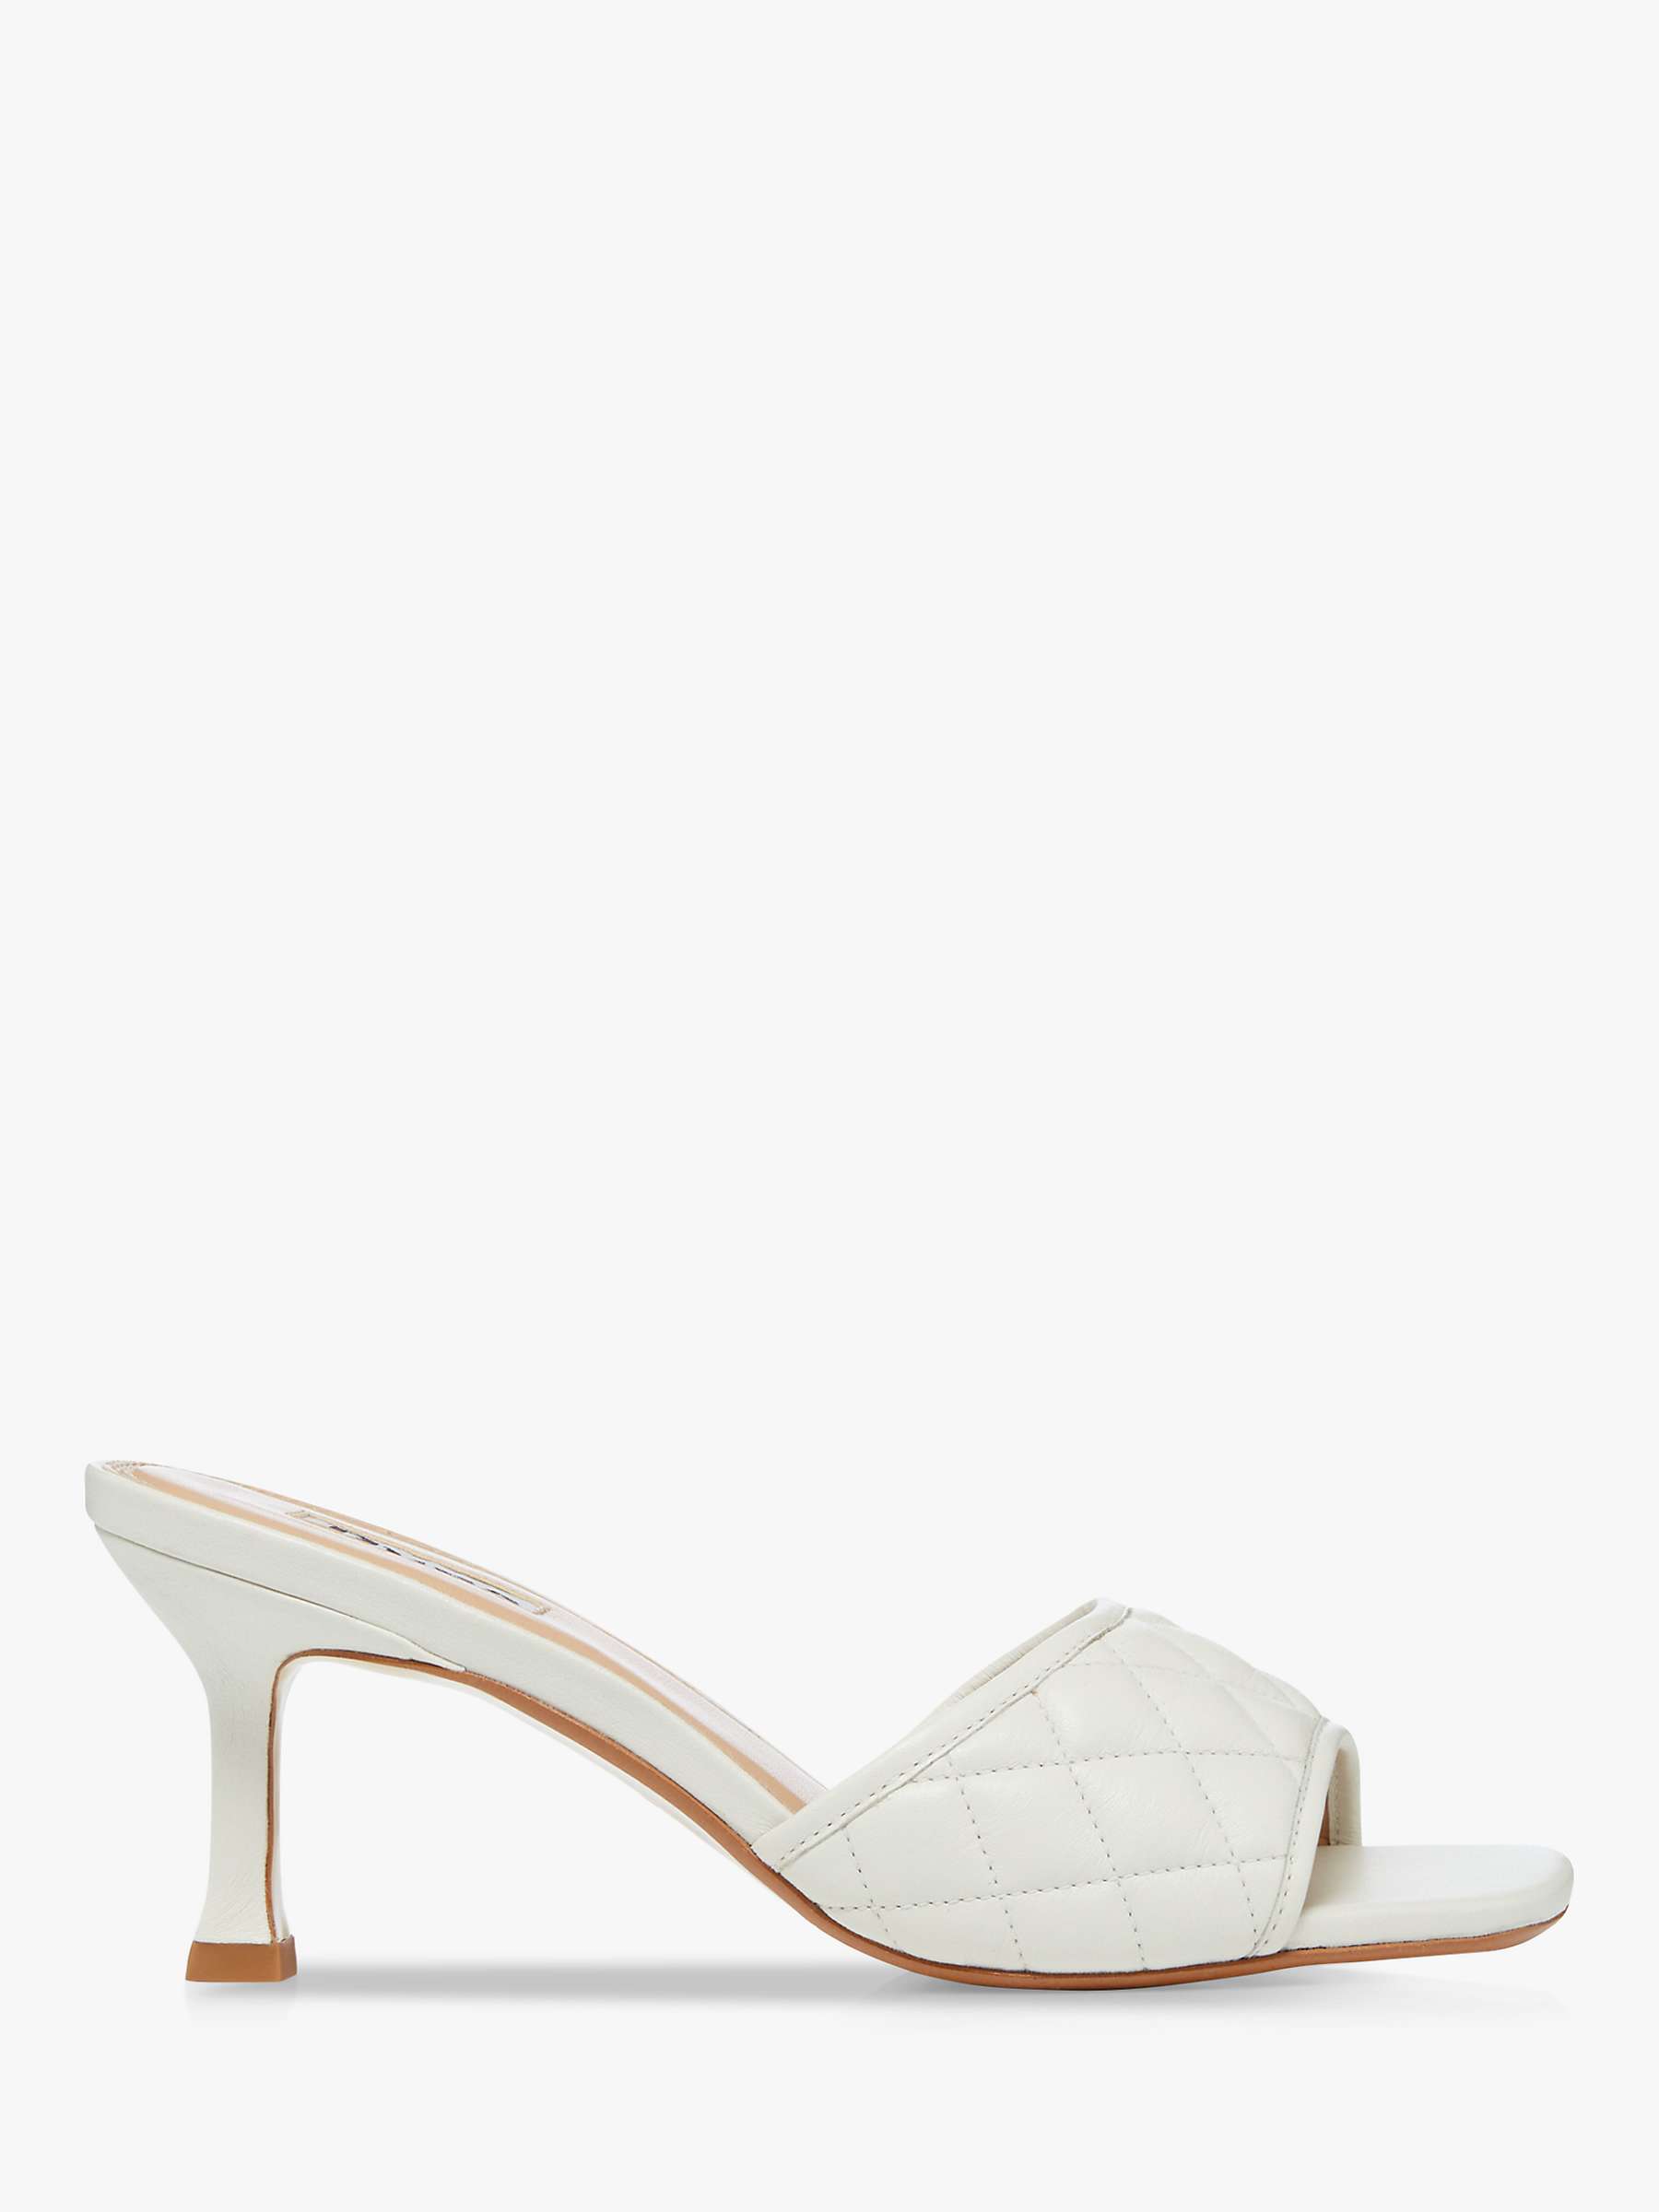 Dune Maison Leather Quilted Mules, White at John Lewis & Partners